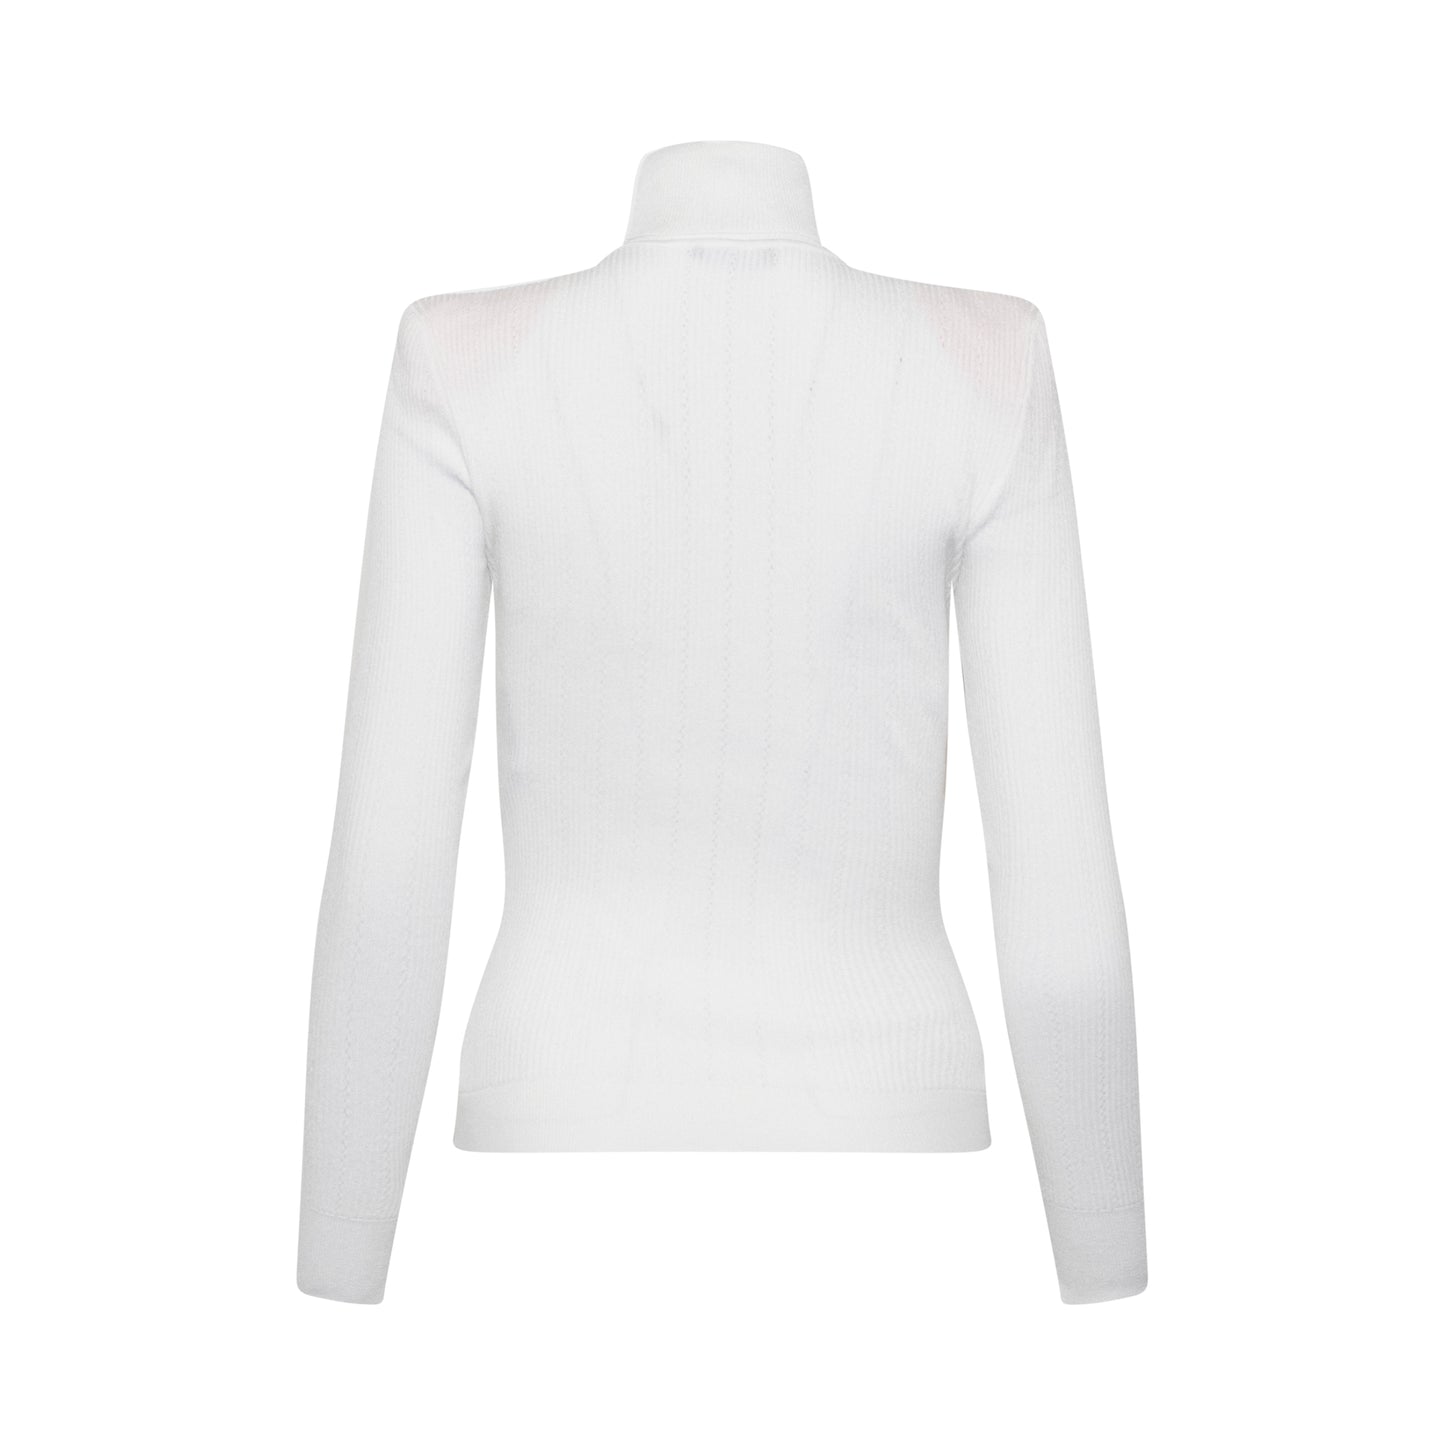 Button Turtleneck Sweater in White